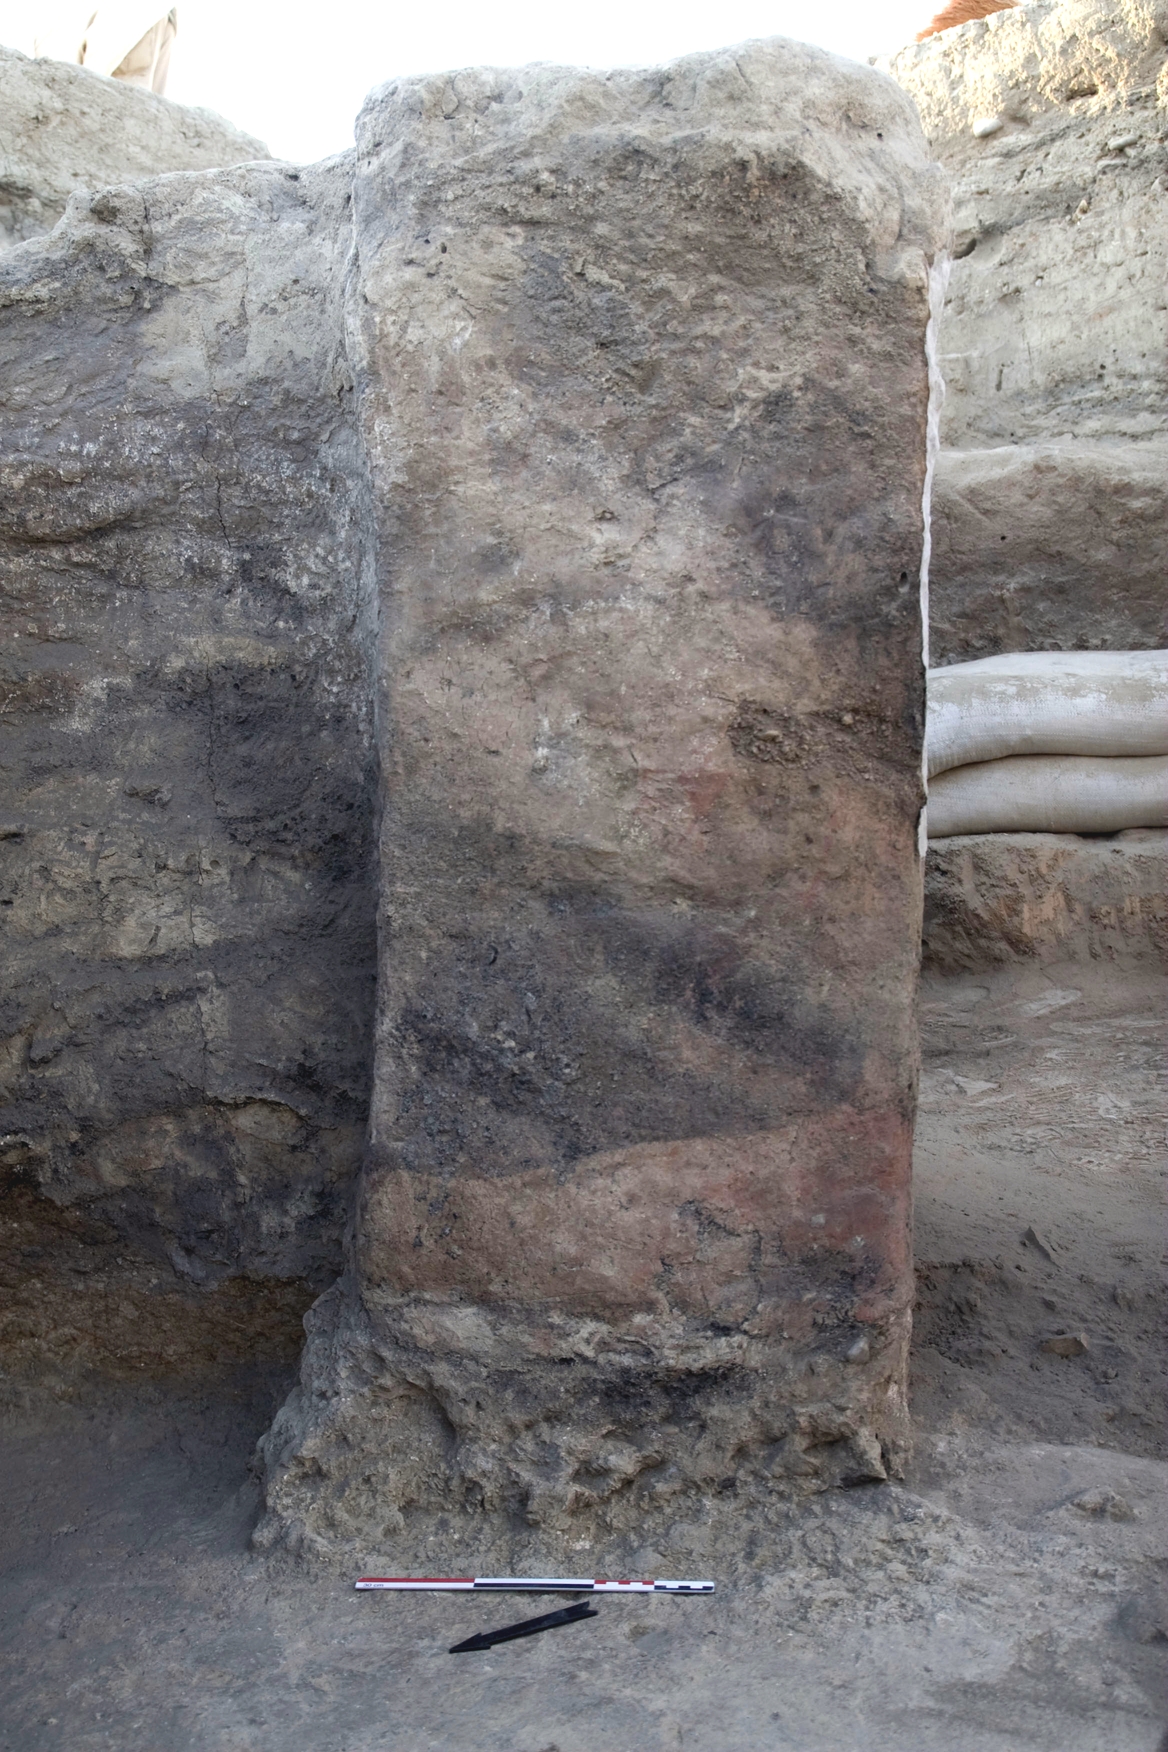 A view of the backside of the painted buttress in House 14. The dark ashy stripes are remains of the burnt fill in the house. A portion of the painting can be seen just above the lower ashy stripe.